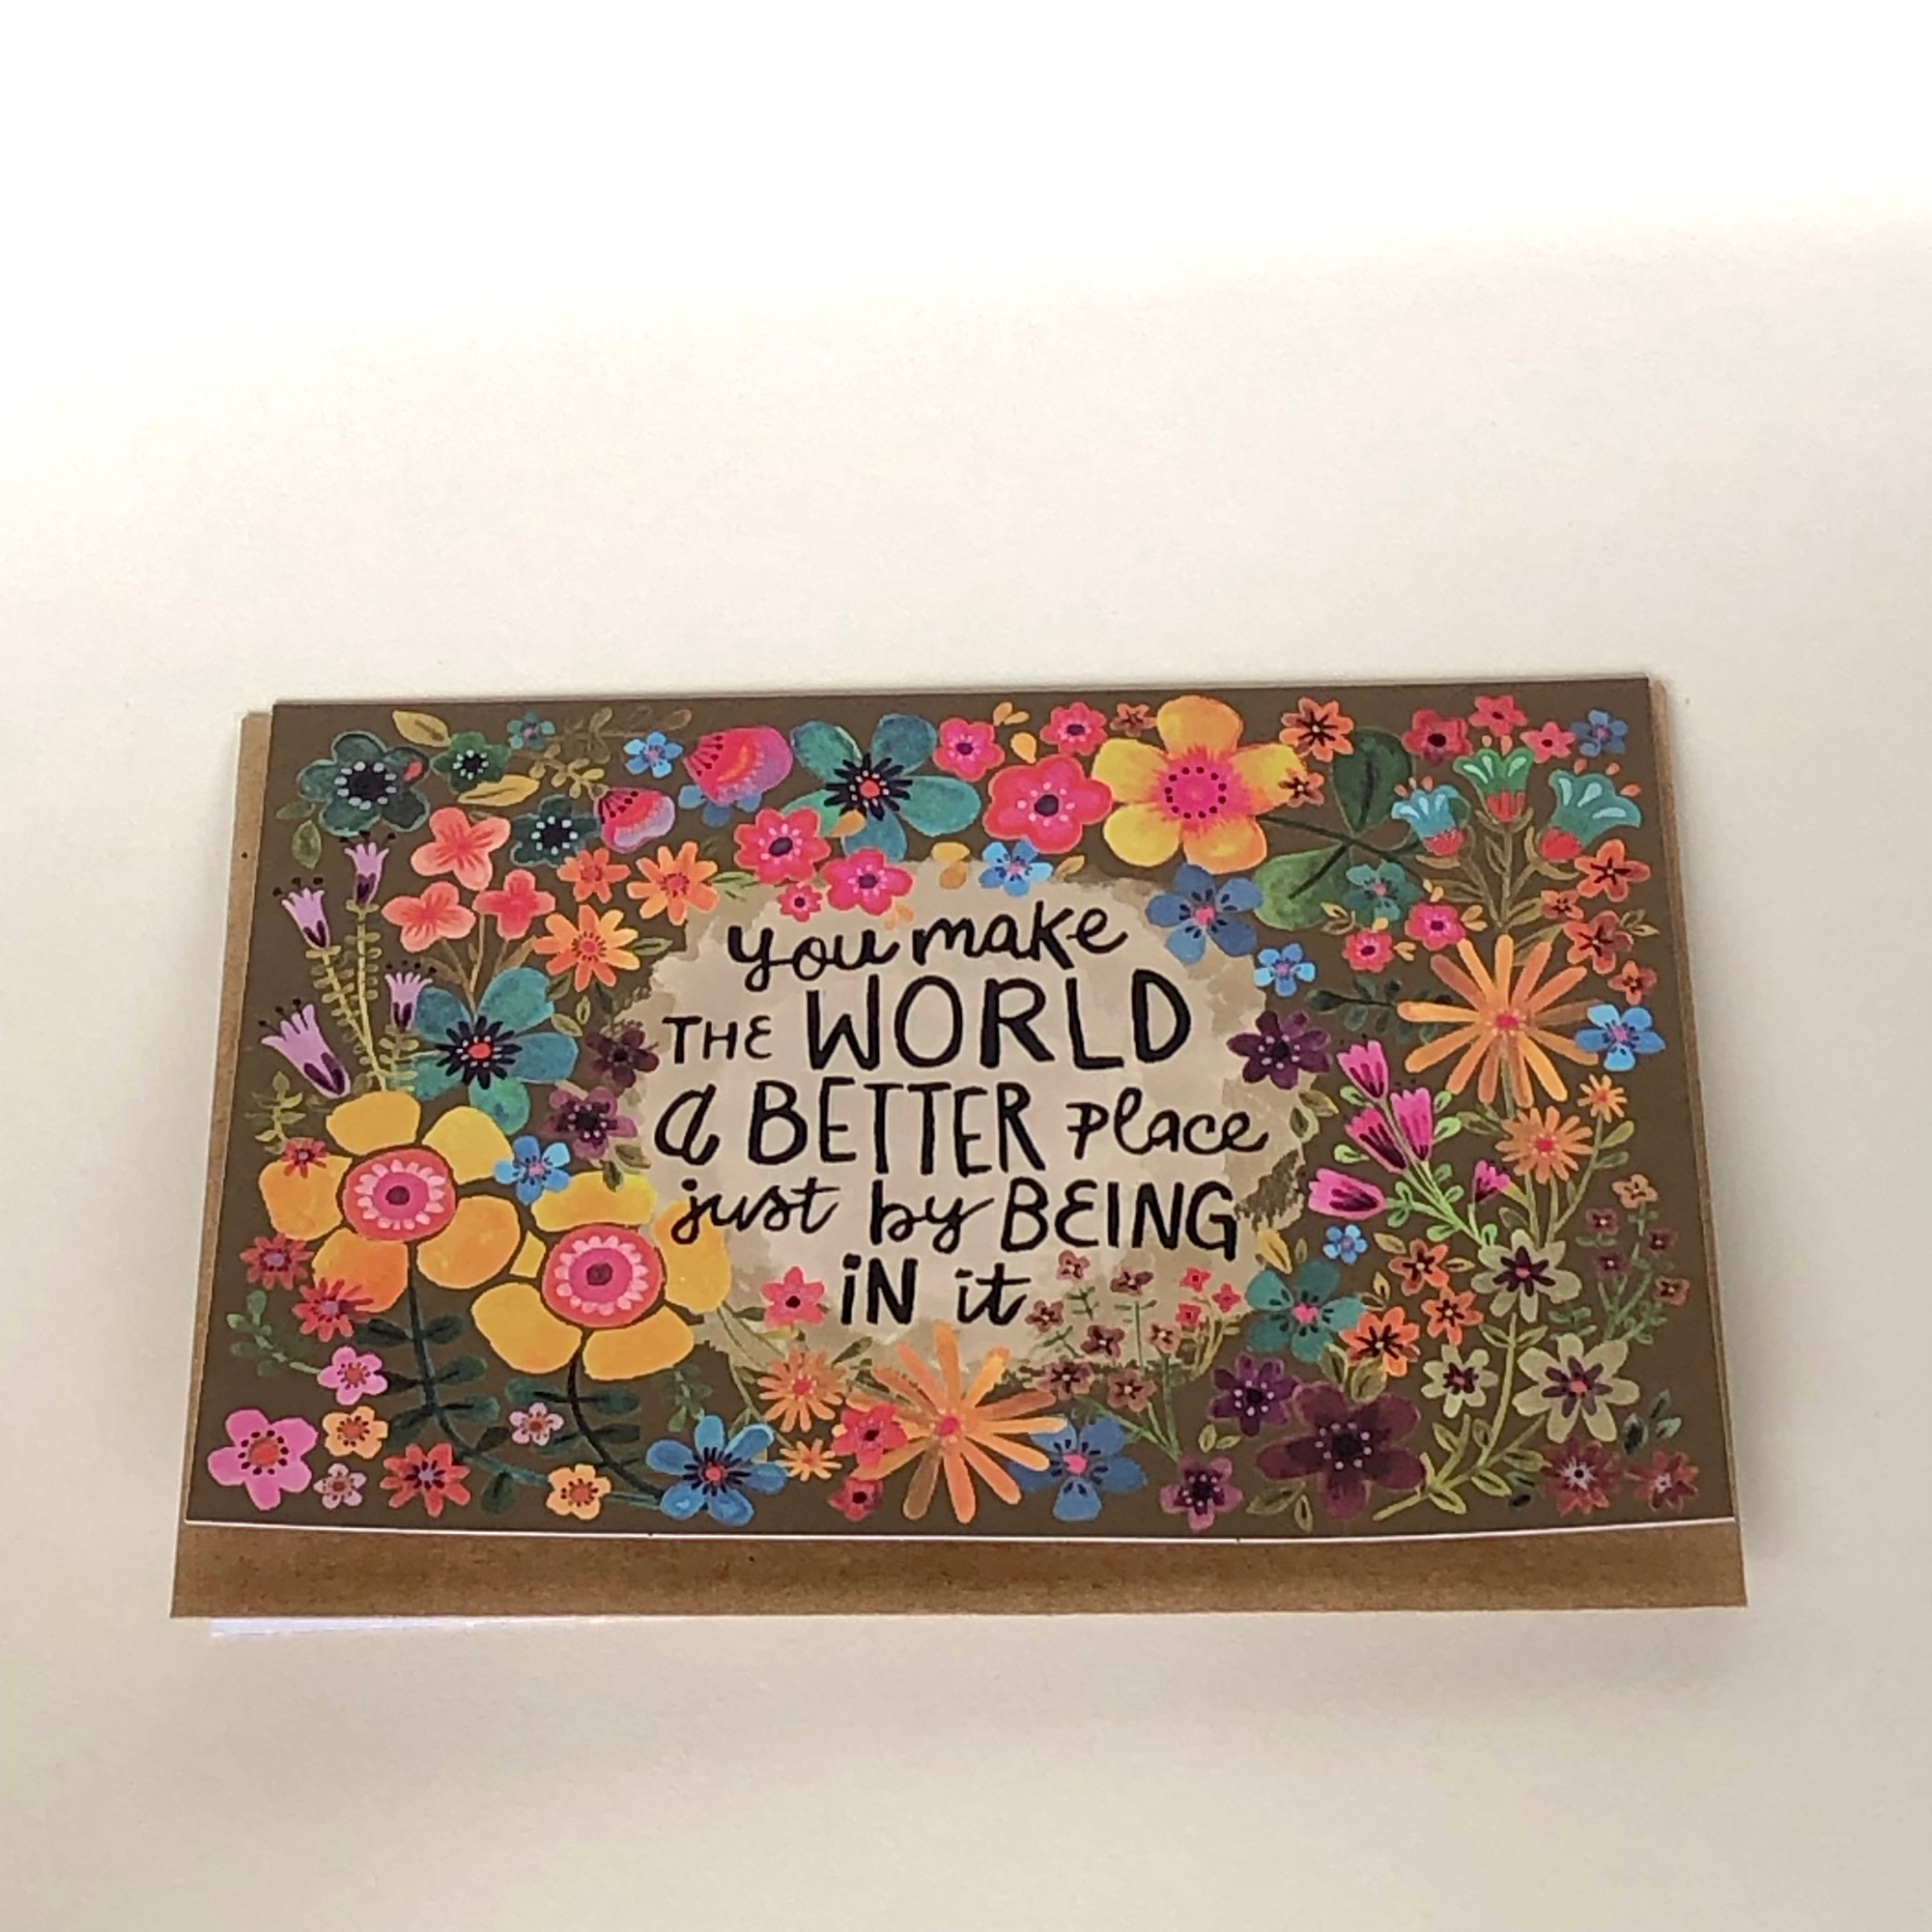 You make the world a better place card |Brown Lands